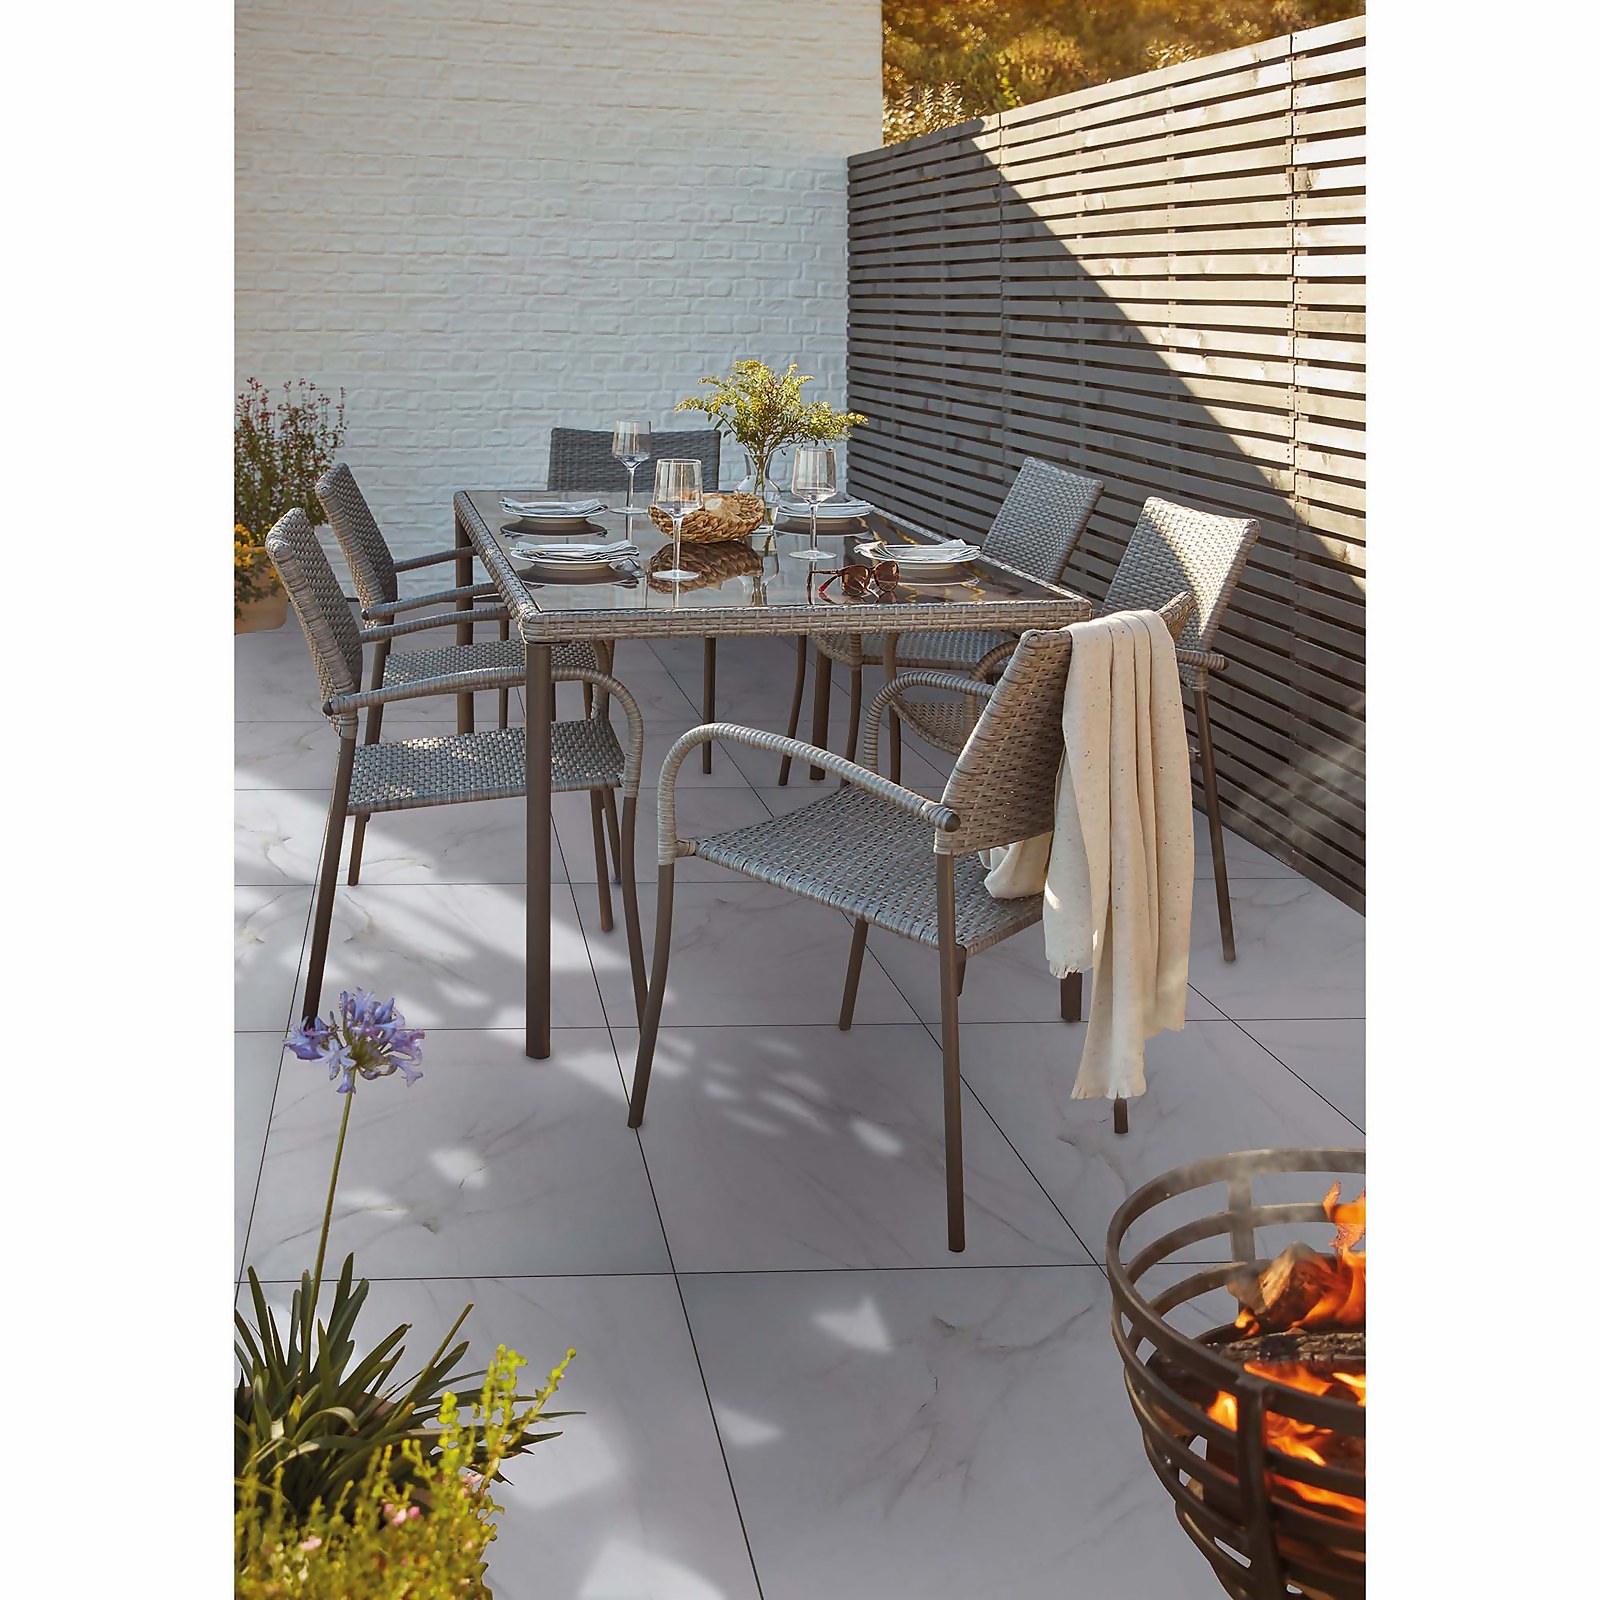 Photo of Calacatta Nexa Marble Stone Effect Porcelain Outdoor Tiles 60 X 60cm - Pack Of 2